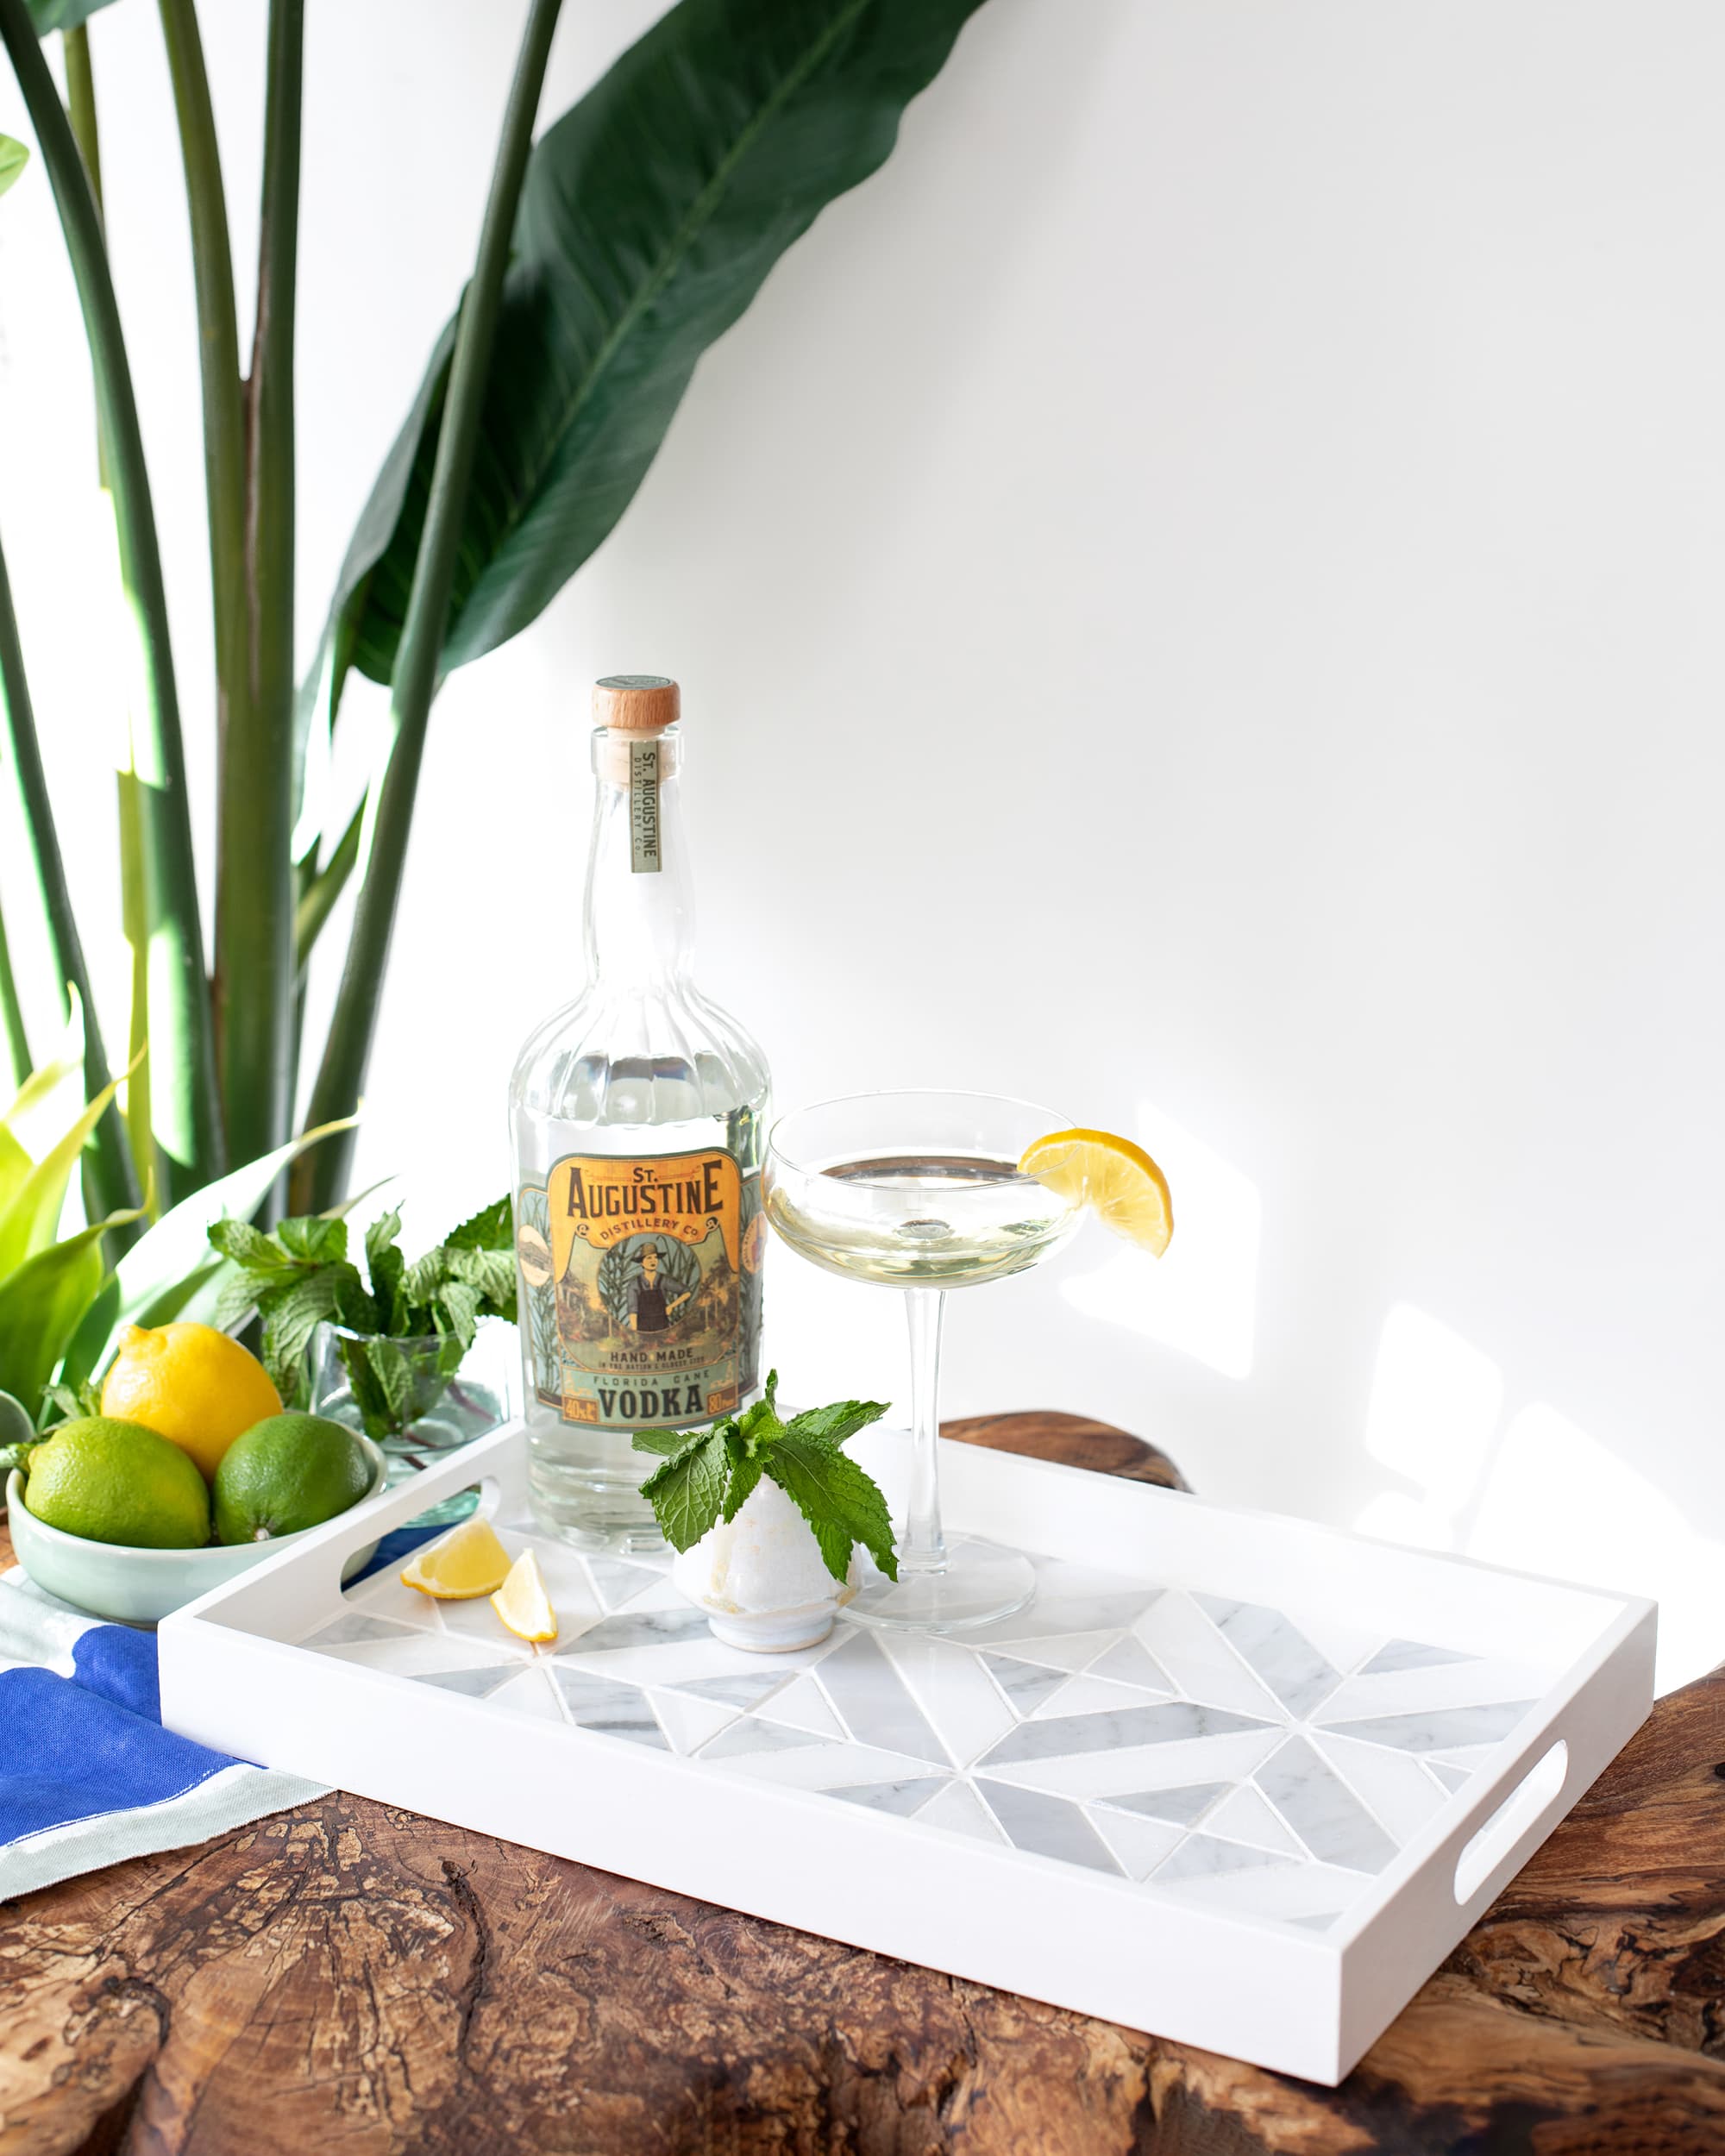 How to Make a Tiled Drink Tray - Step-by-Step Photos and